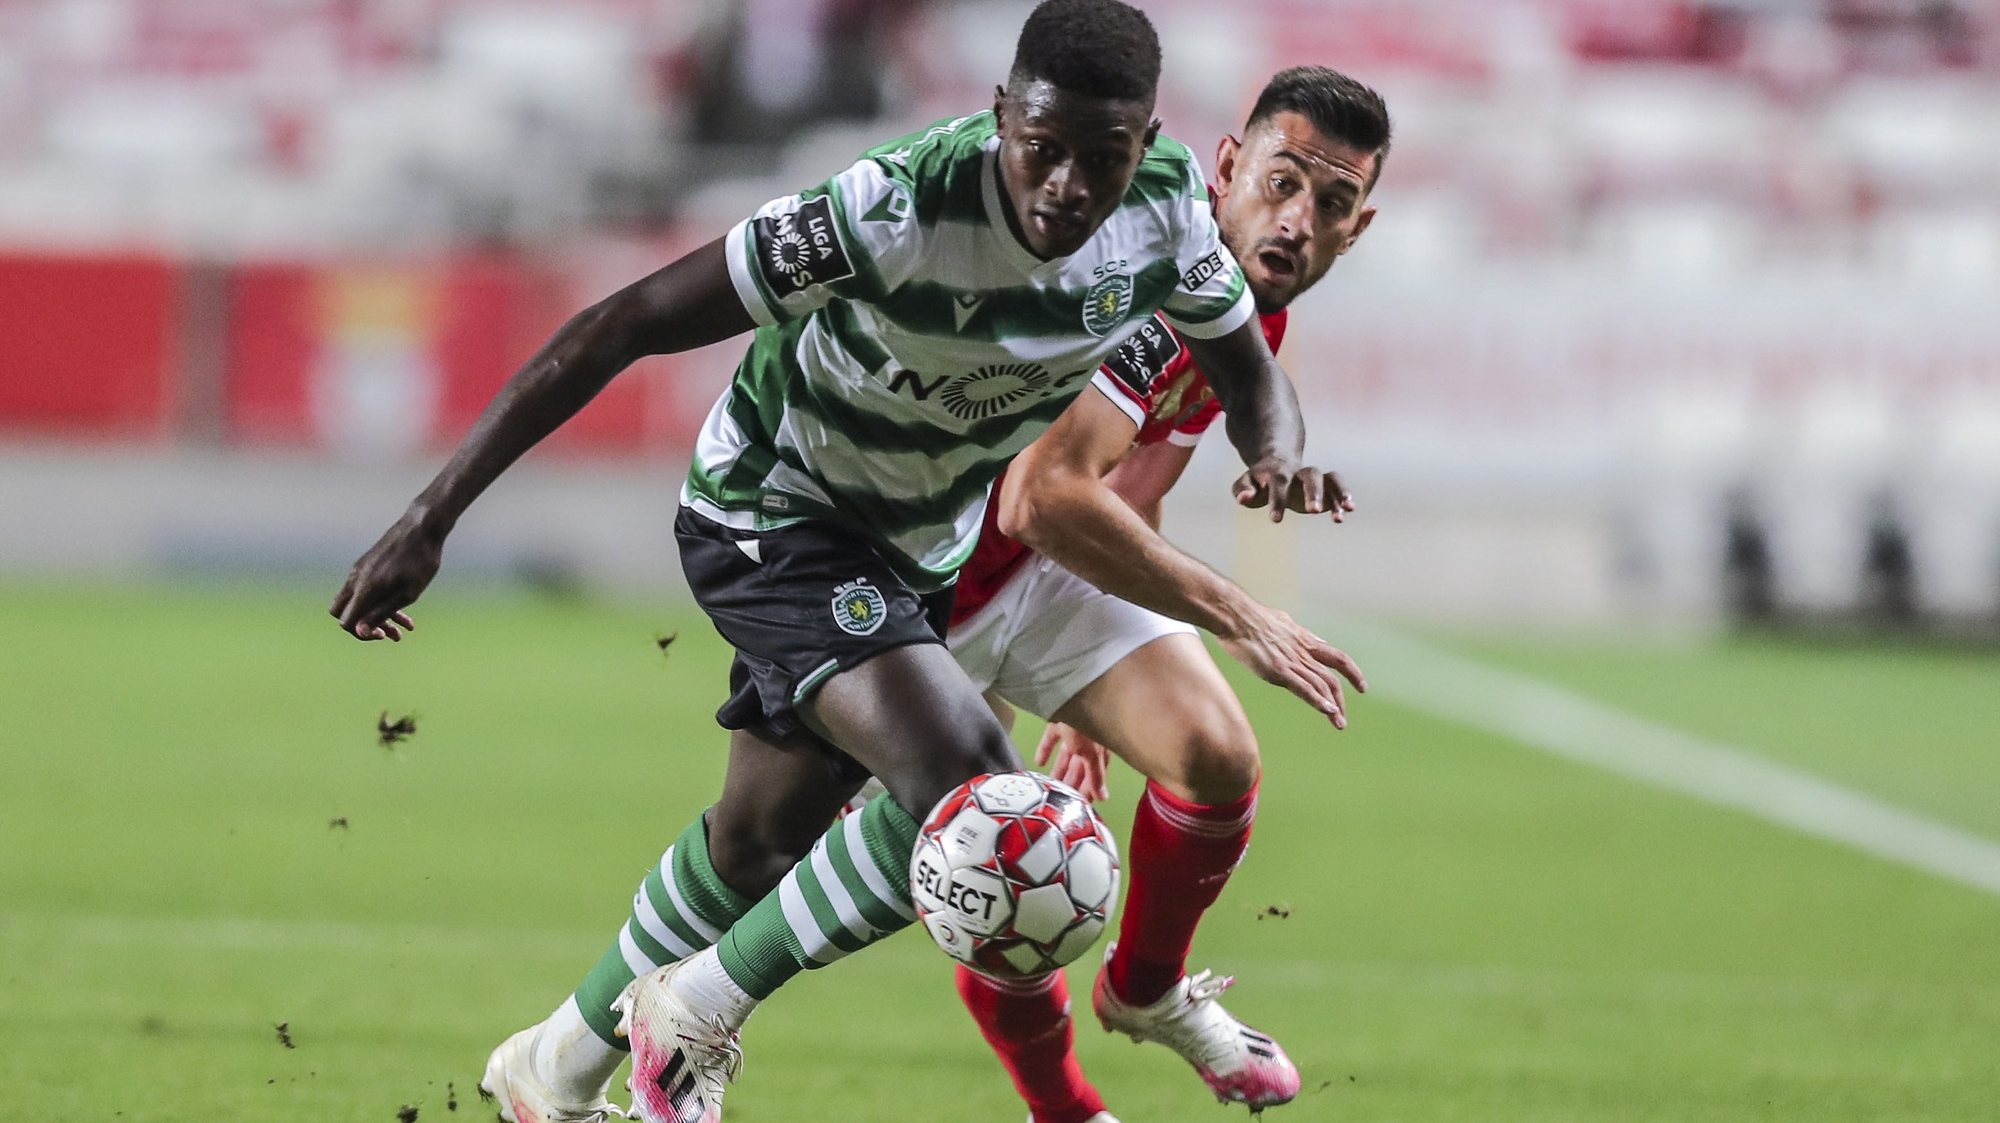 Benfica&#039;s Pizzi (R) fight for the ball with Sporting&#039;s Nuno Mendes (L) during the Portuguese First League Soccer match held at Luz Stadium in Lisbon, Portugal 25 July 2020. MIGUEL A. LOPES/LUSA